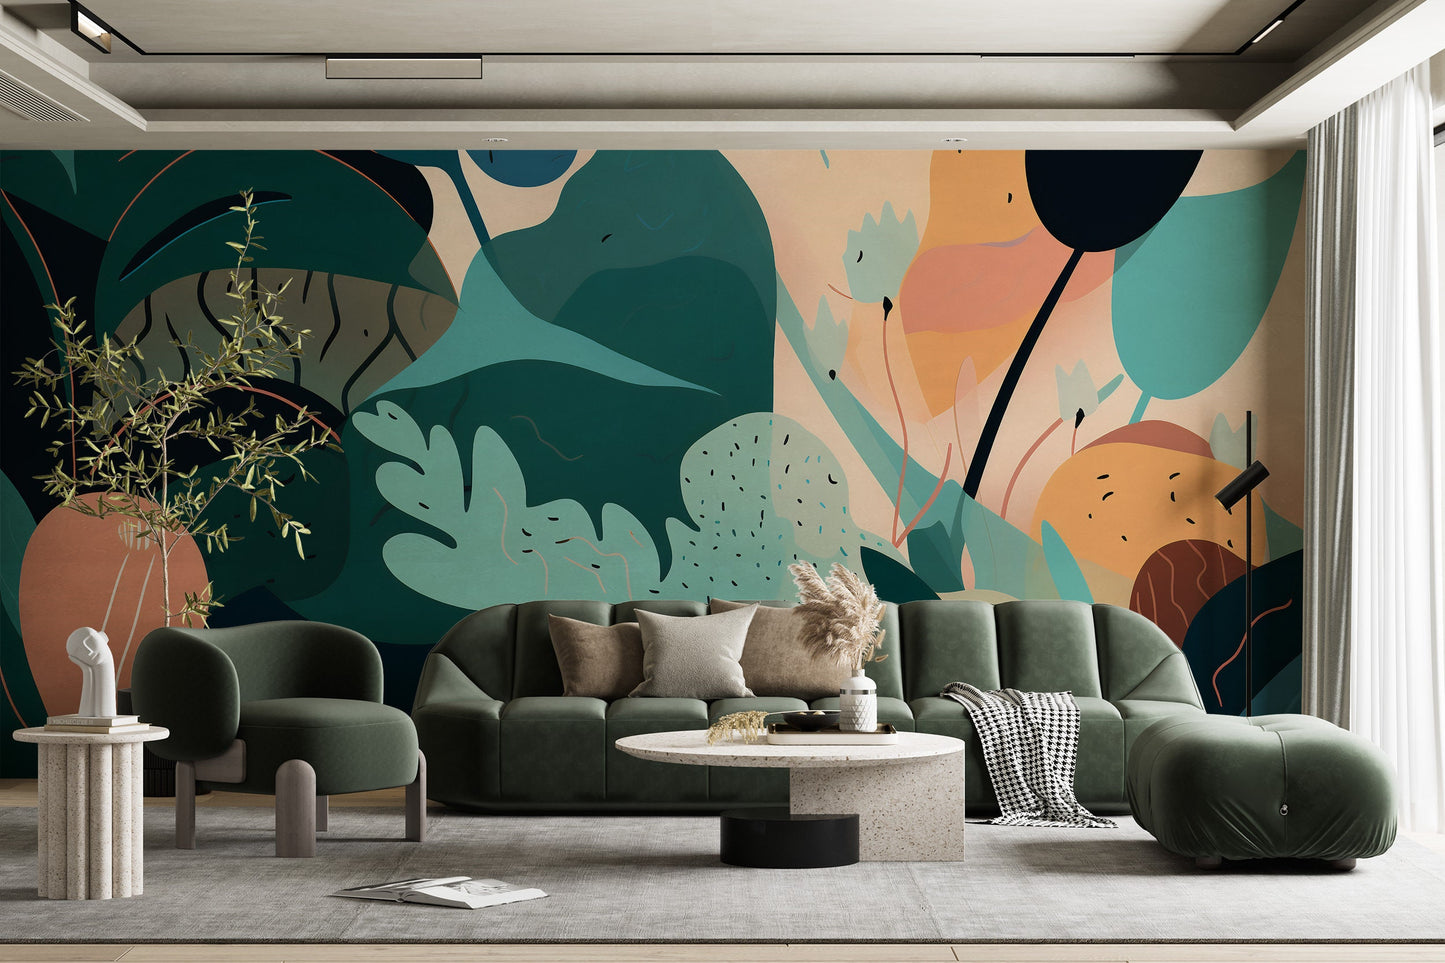 Abstract Wallpaper Mural with Delicate Matisse-Inspired Shapes. Easy-to-Apply Peel and Stick.